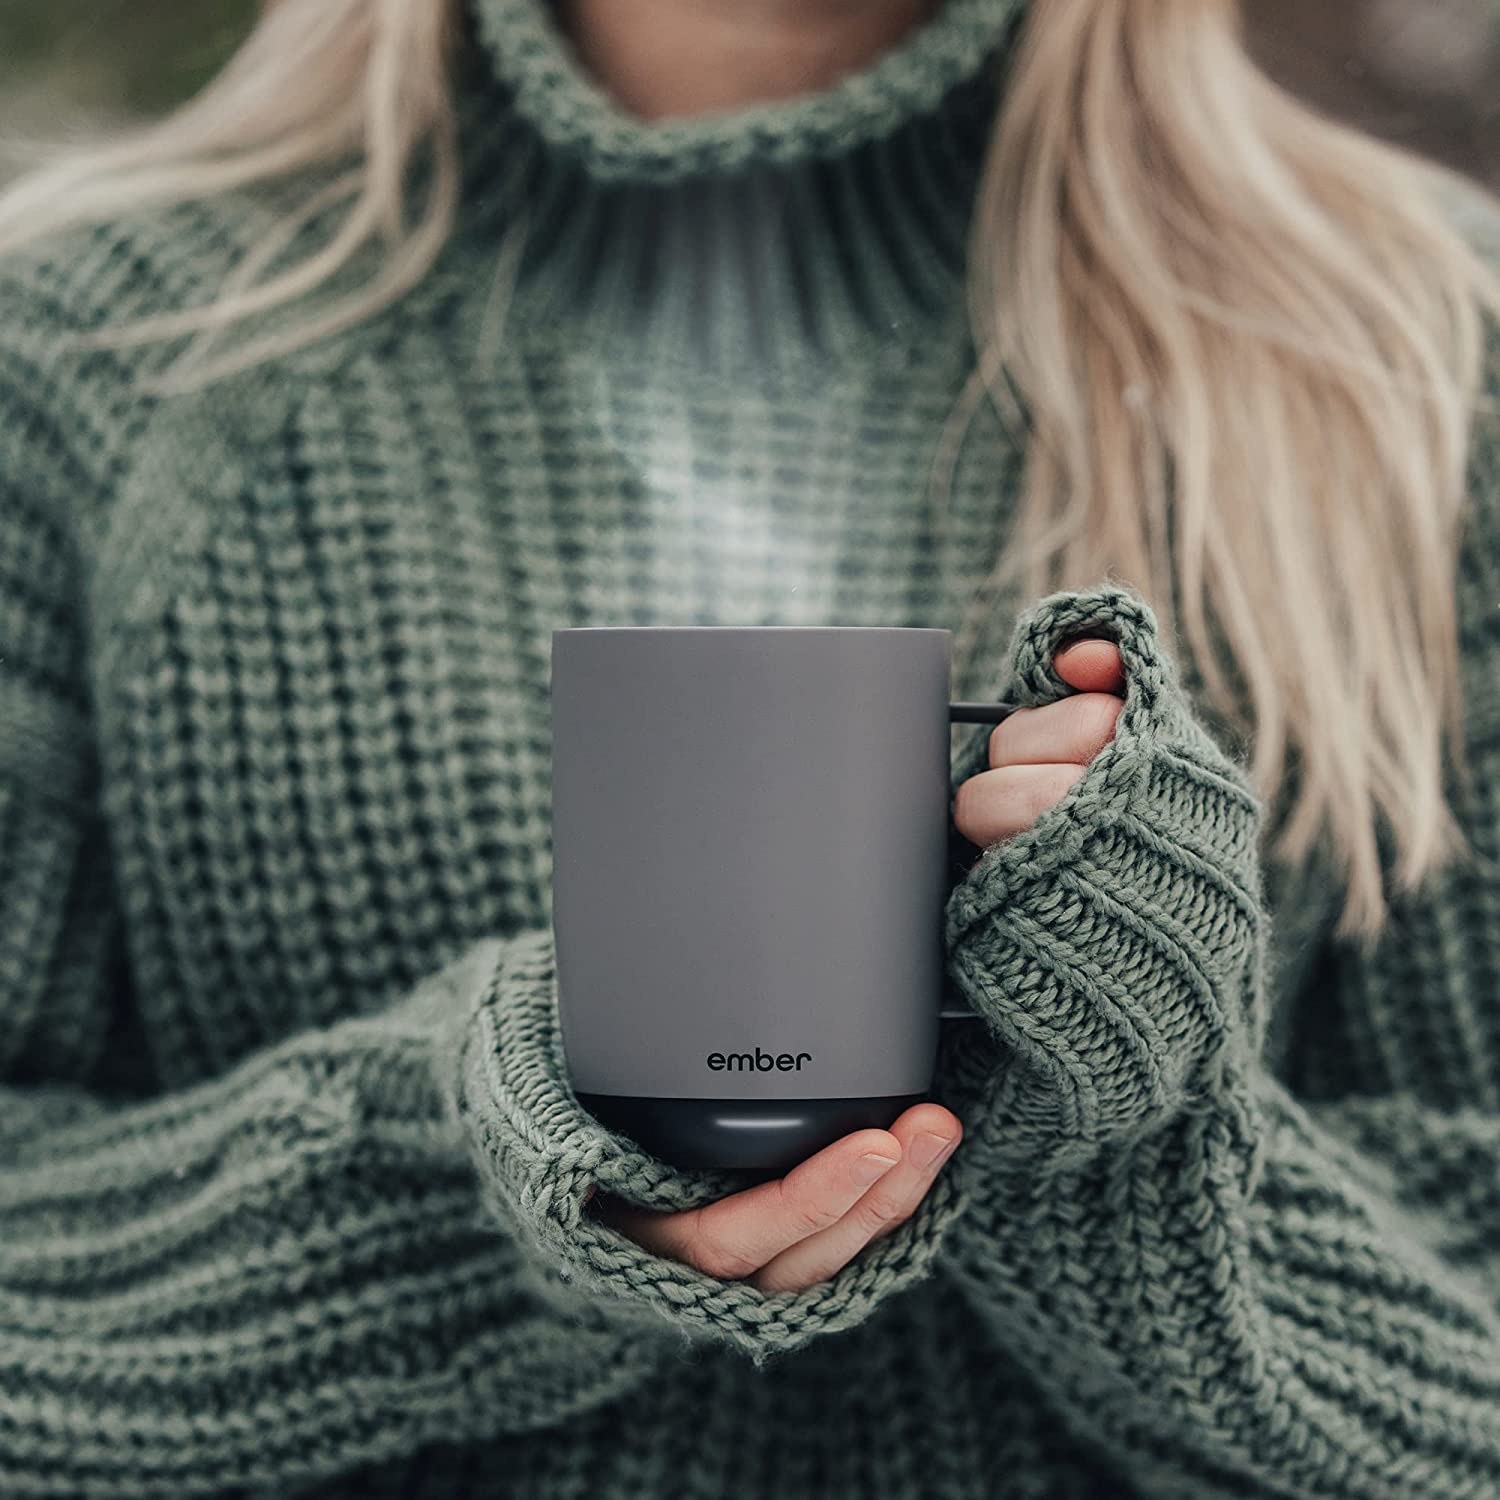 A person wearing a cozy sweater and holding the mug